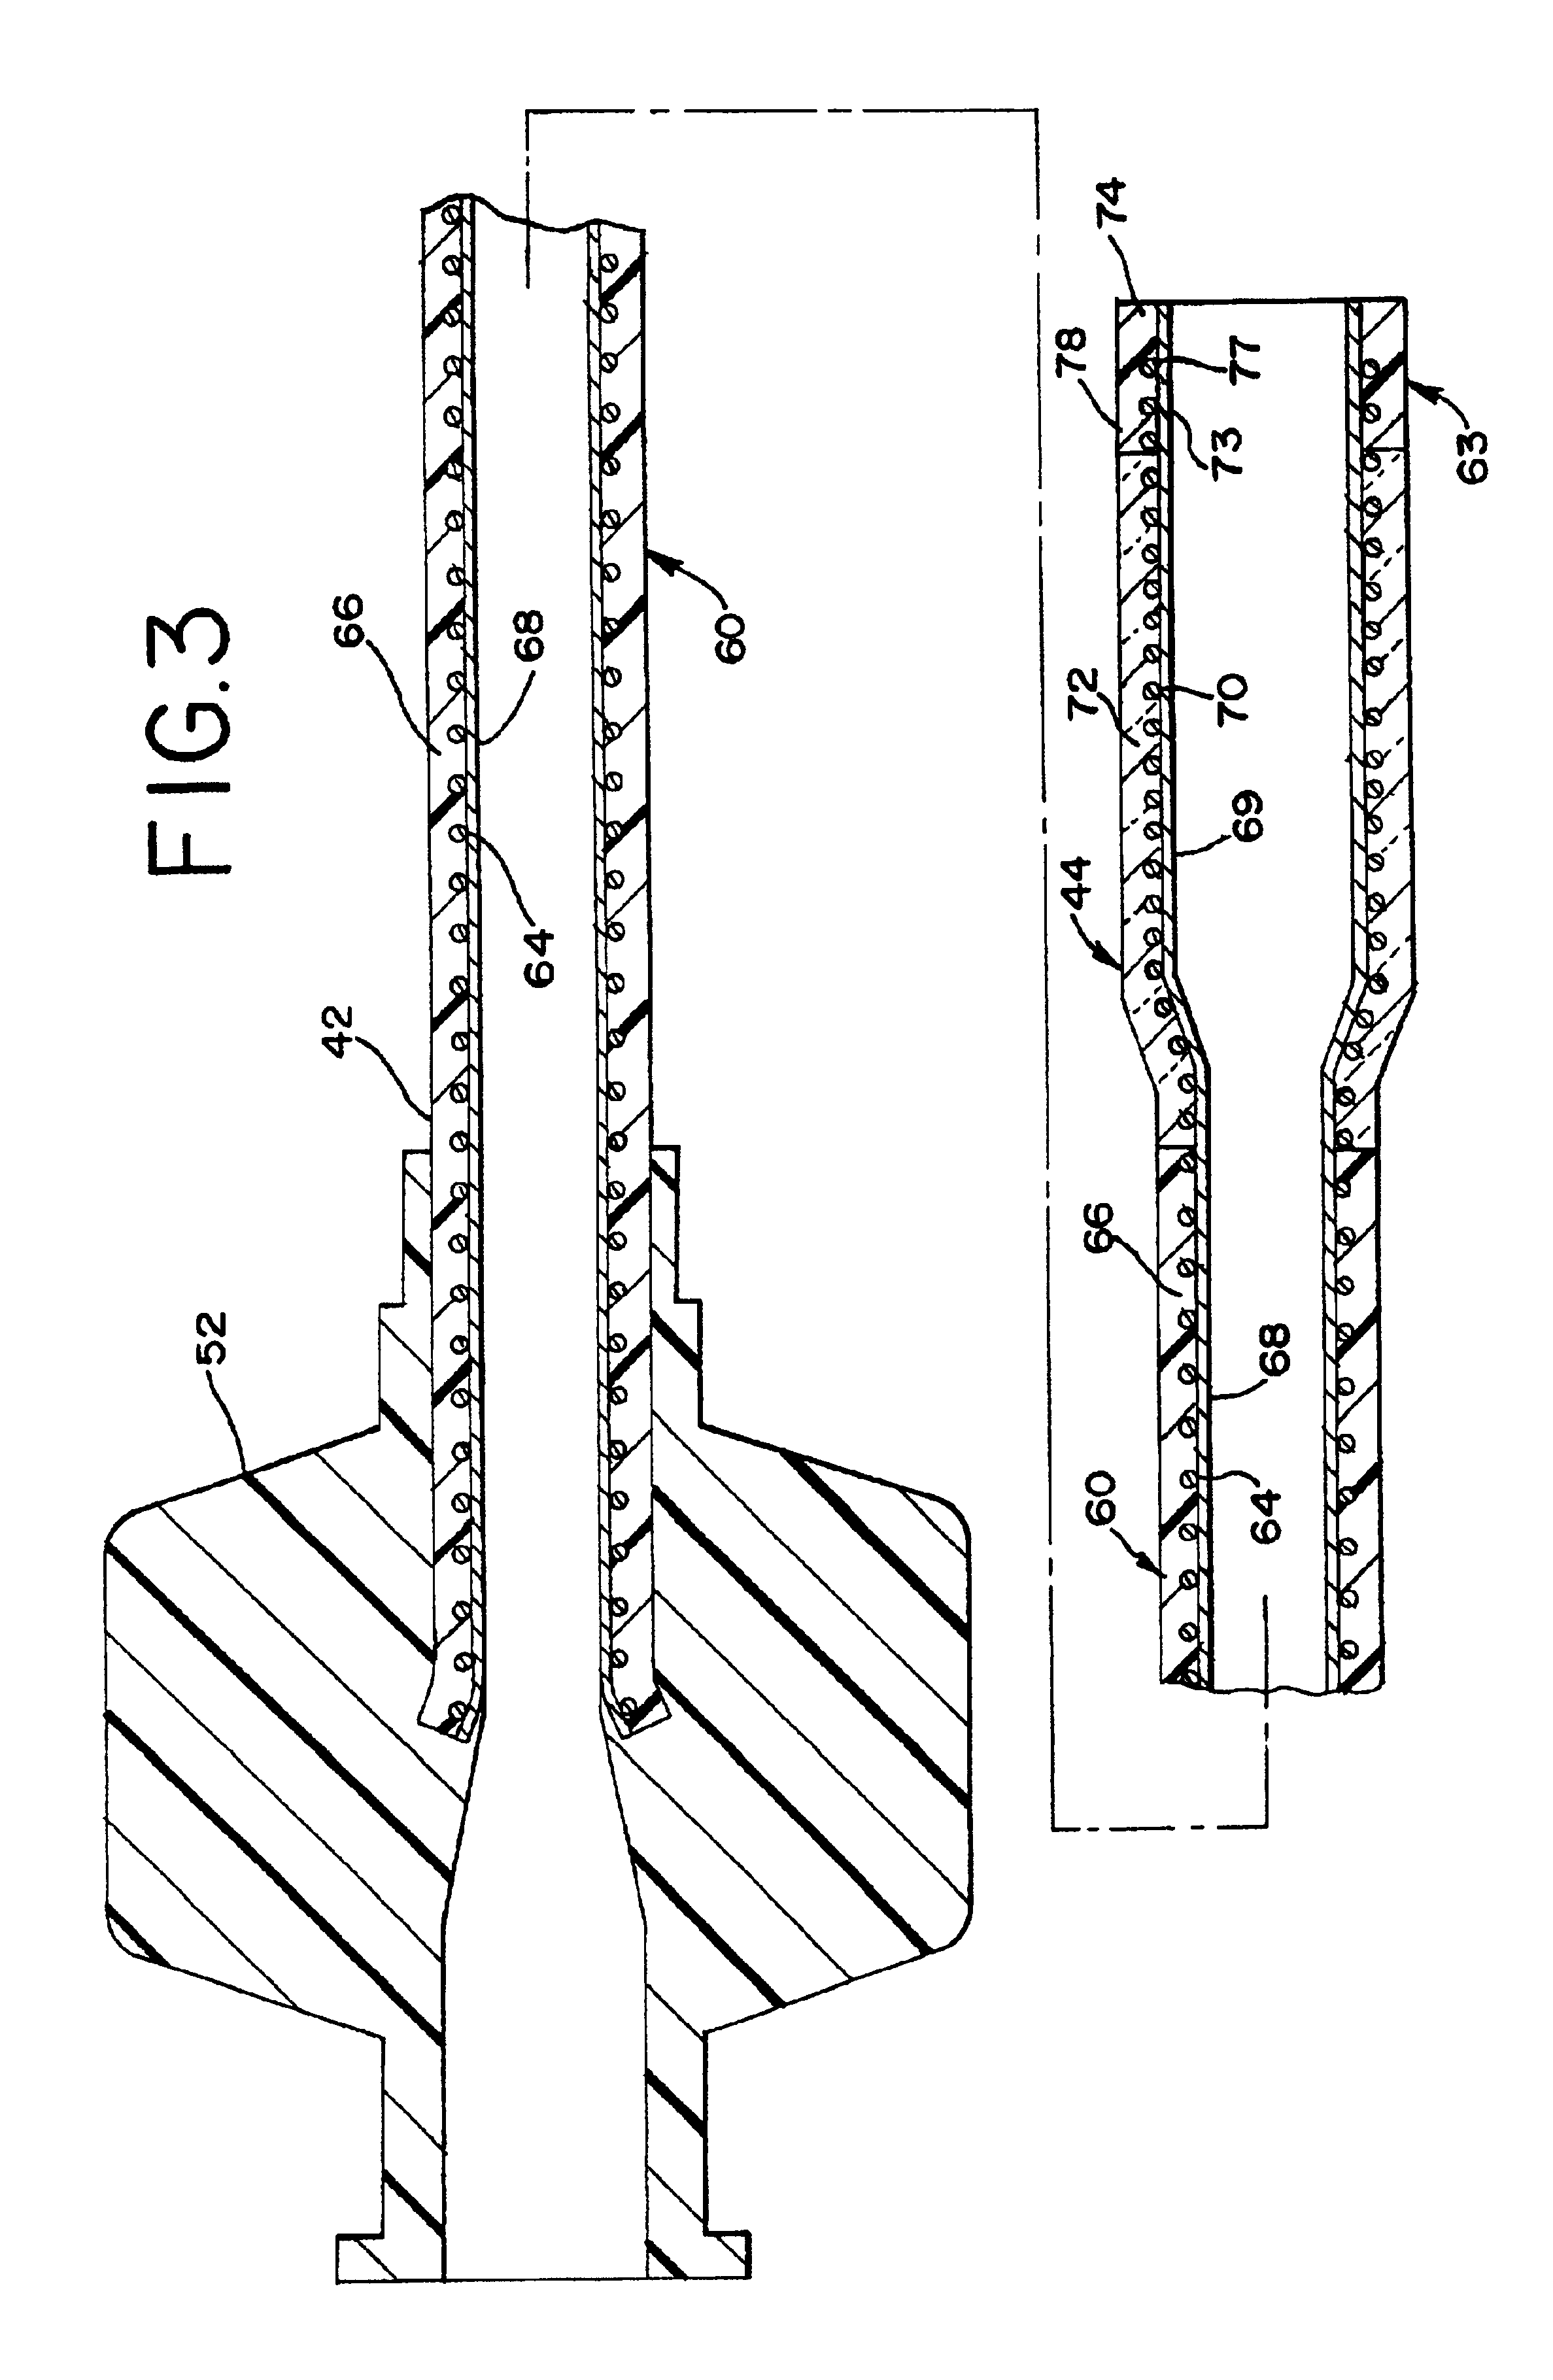 Stent delivery system having delivery catheter member with a clear transition zone